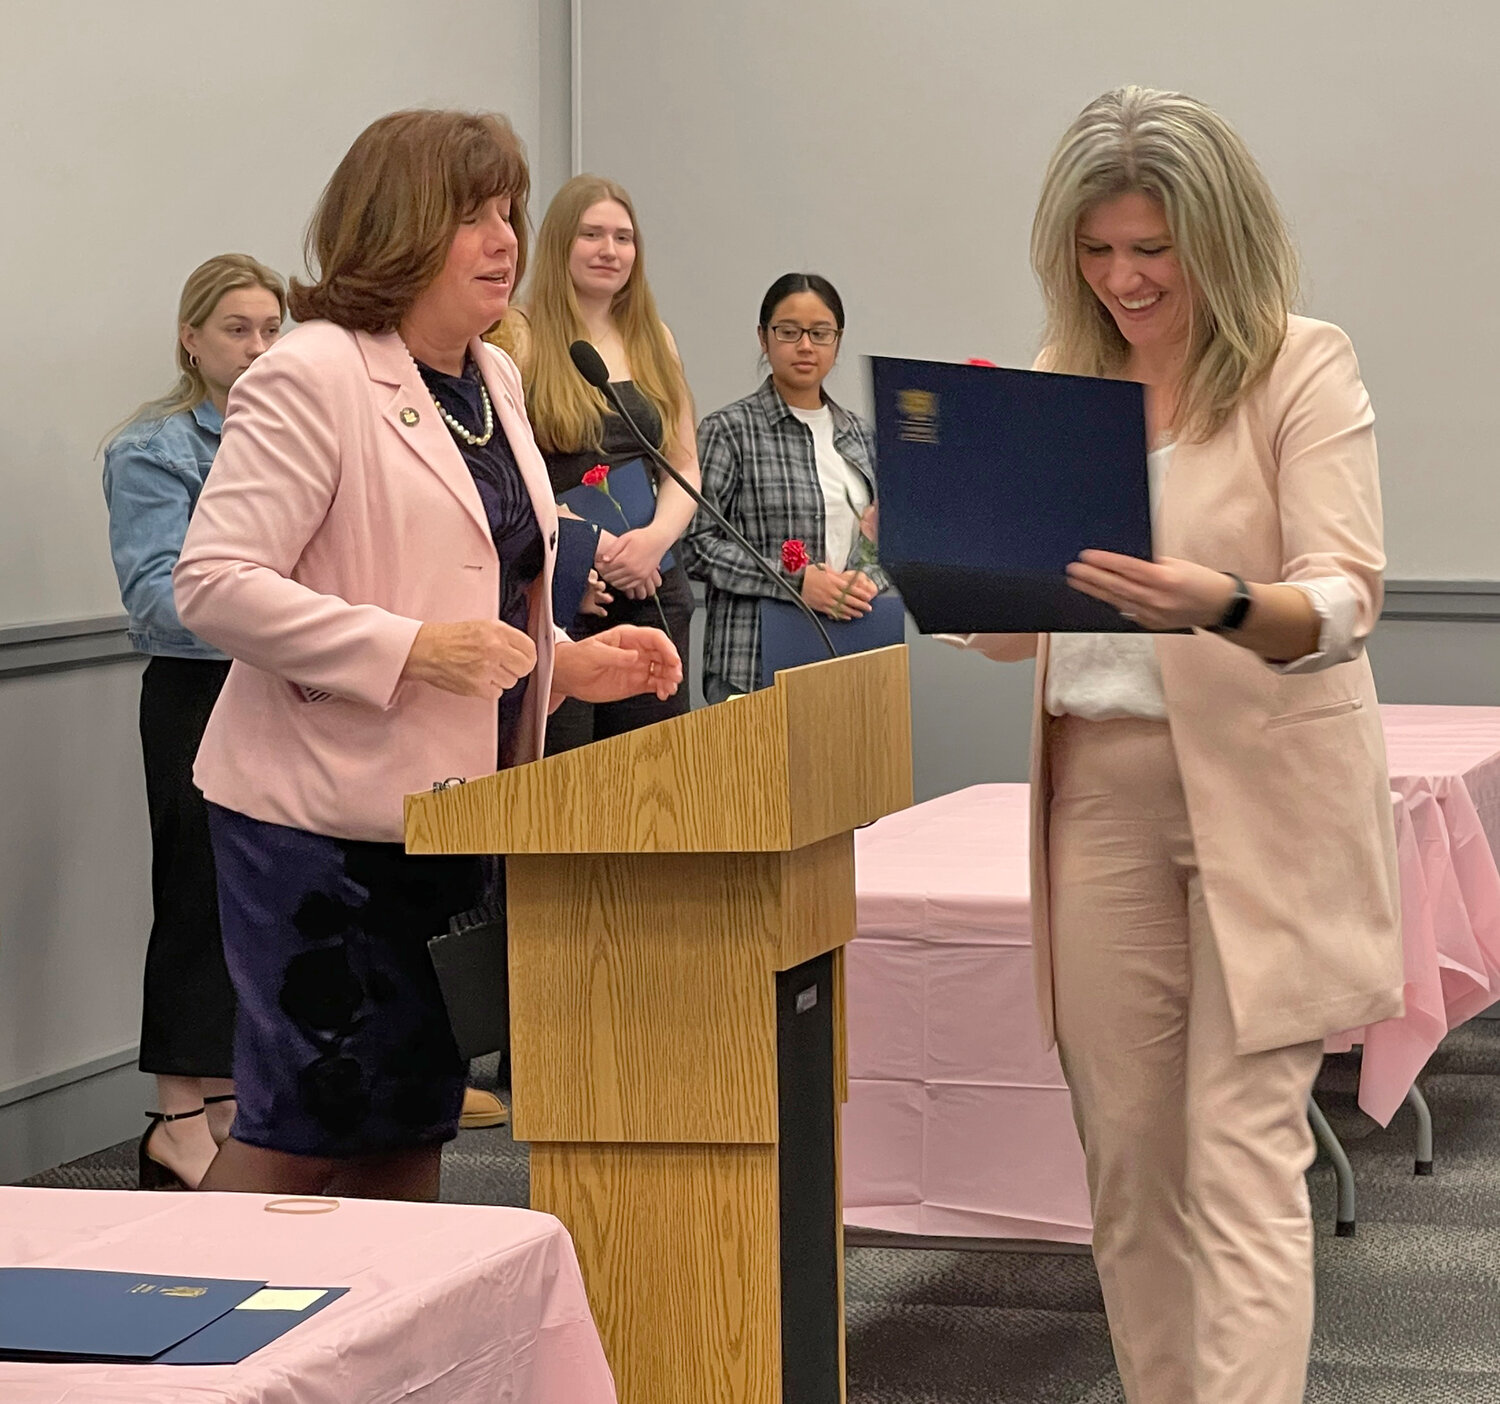 Hanka Grabovica accepts her Women of Distinction award from Assemblywoman Marianne Buttenschon at this year’s Women of Distinction event on Friday, March 24.